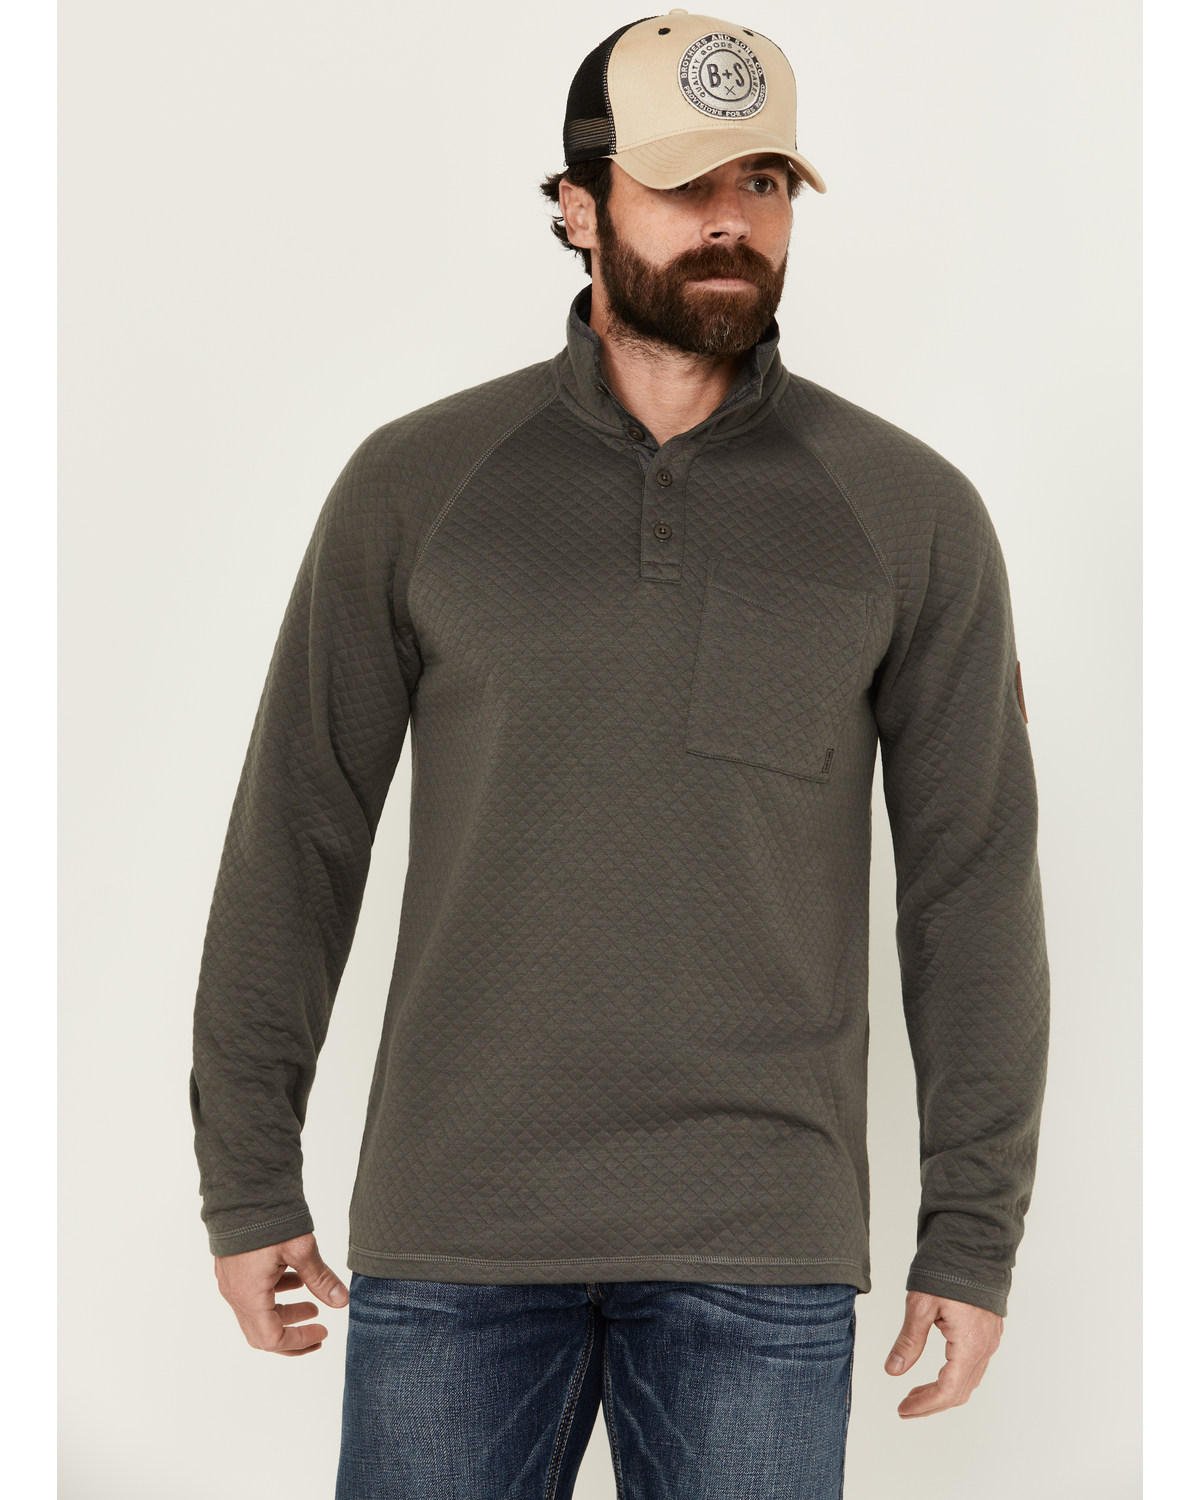 Brothers and Sons Men's Uinta Quilted Pullover